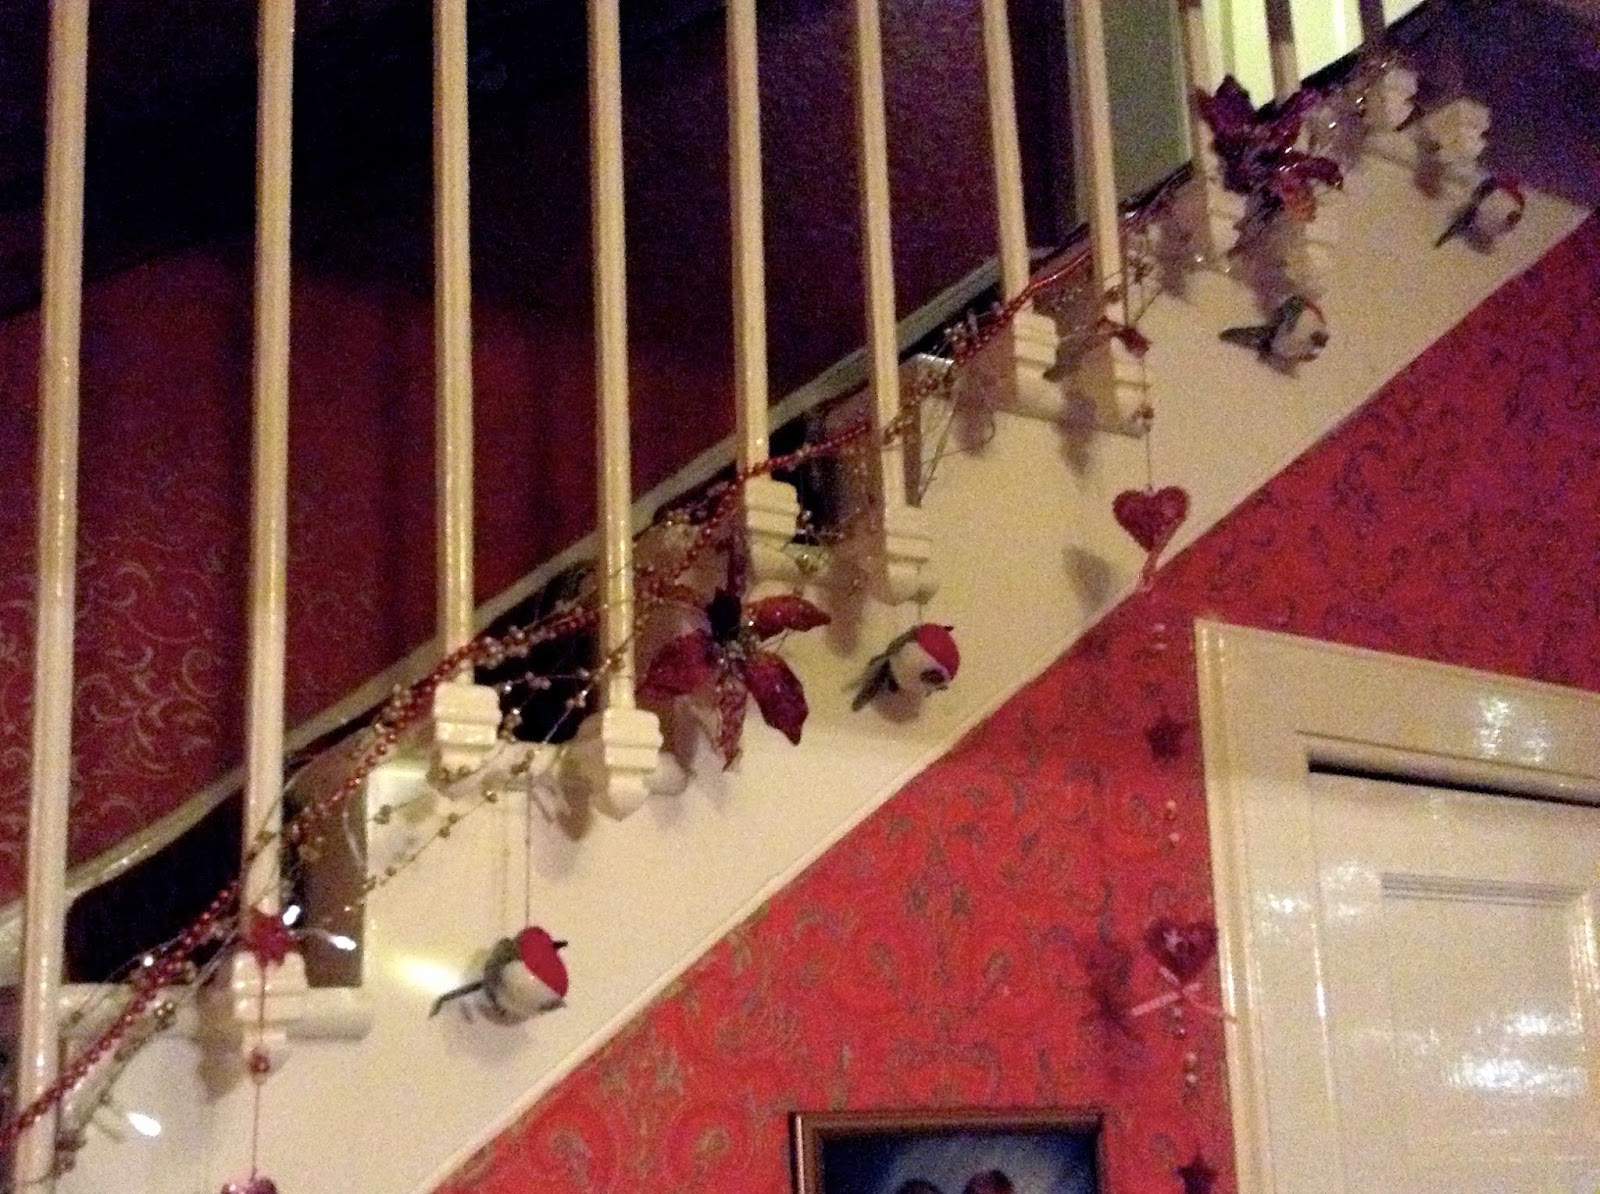 Christmas decorations on stairs - robins, flowers, red & gold beading and dangling hearts